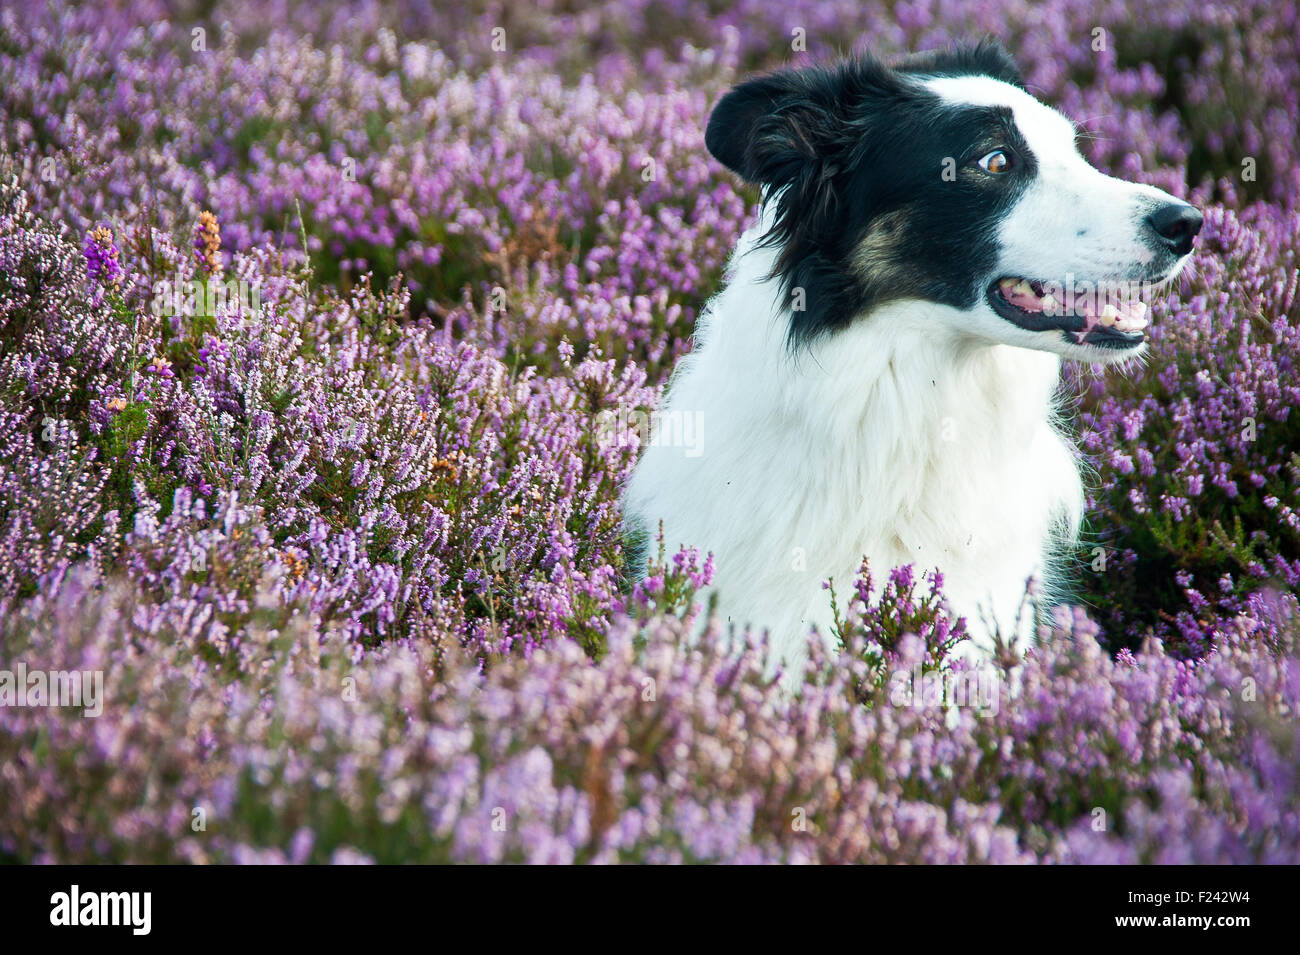 portrait of pet border collie dog in purple heather & lyng in north Yorkshire moors national park, england Stock Photo